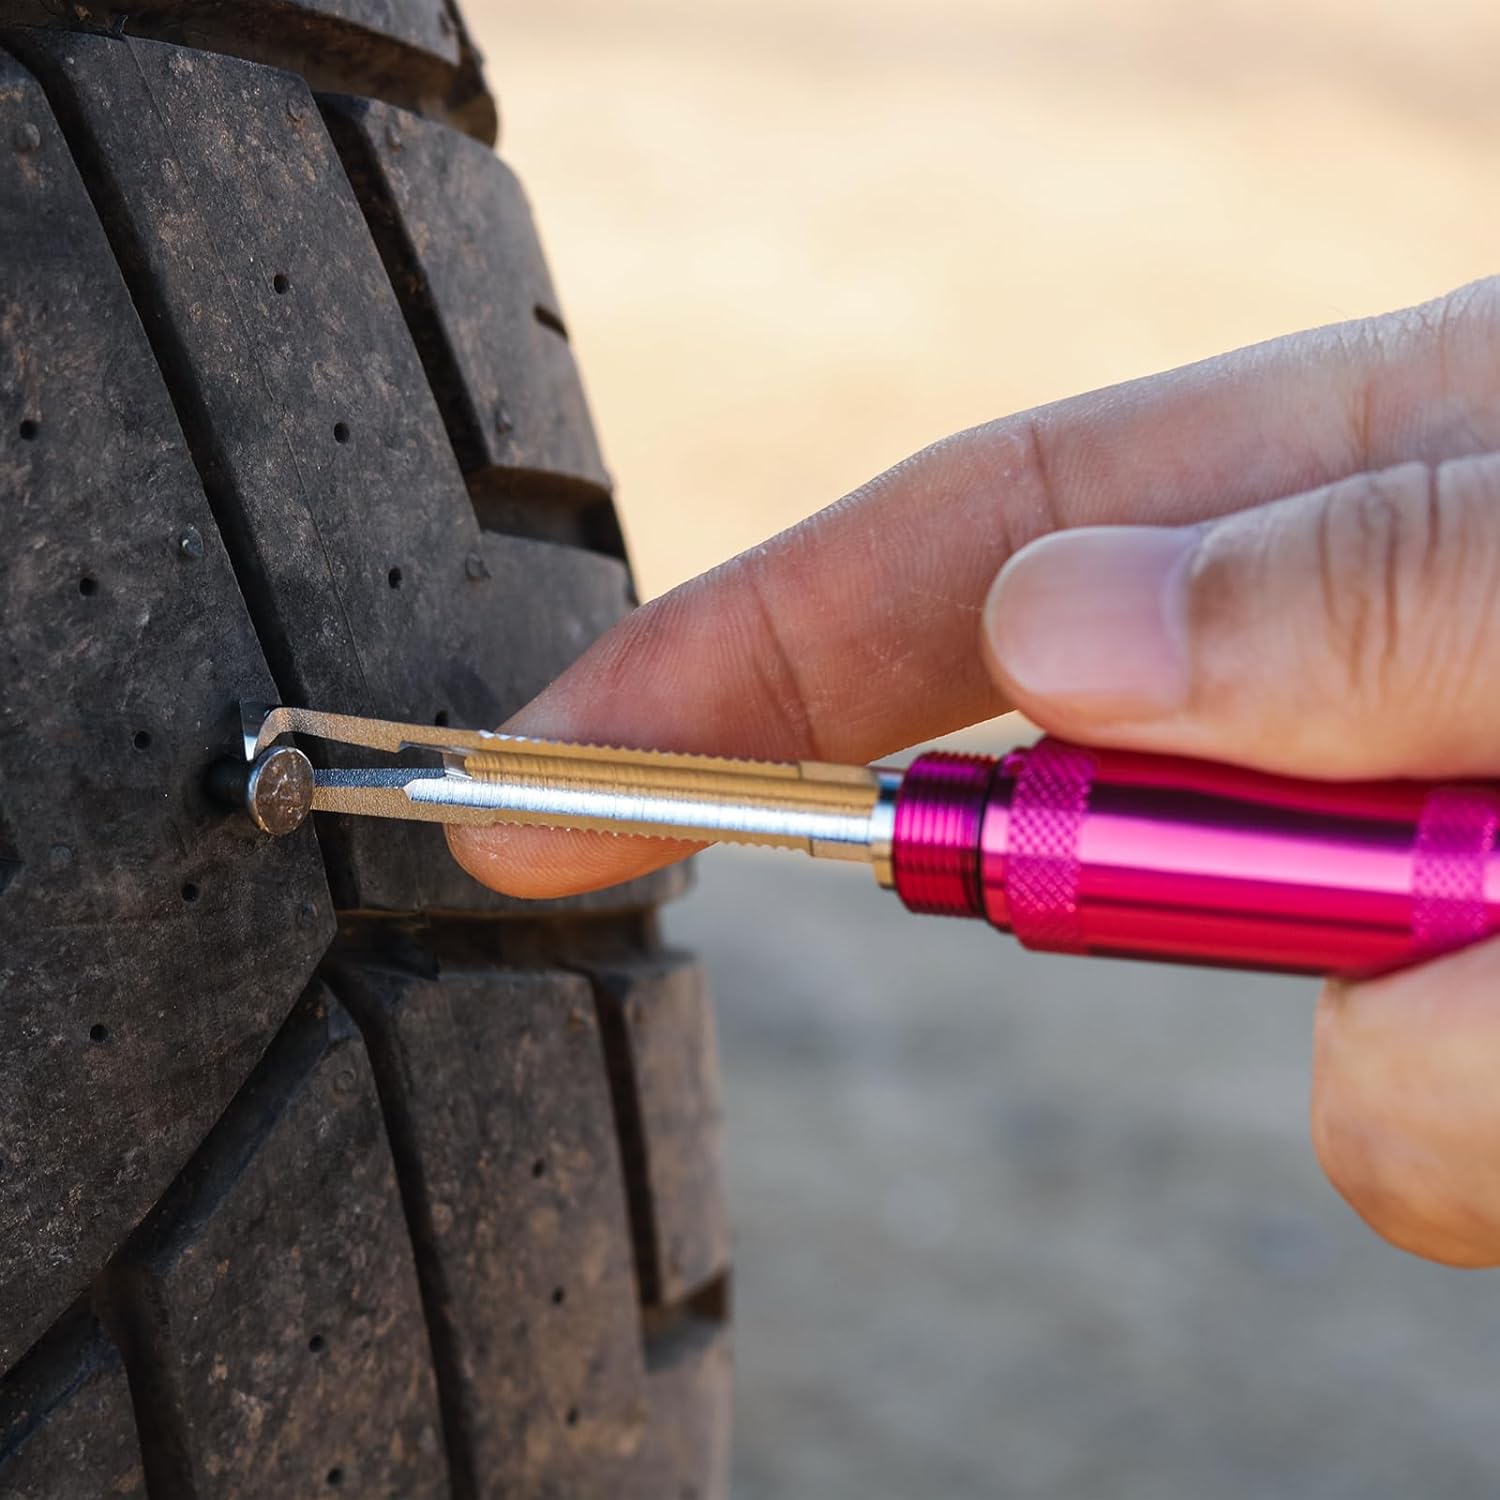 Uwueri Compact Tire Repair Kit for Motorcycle (Pink)